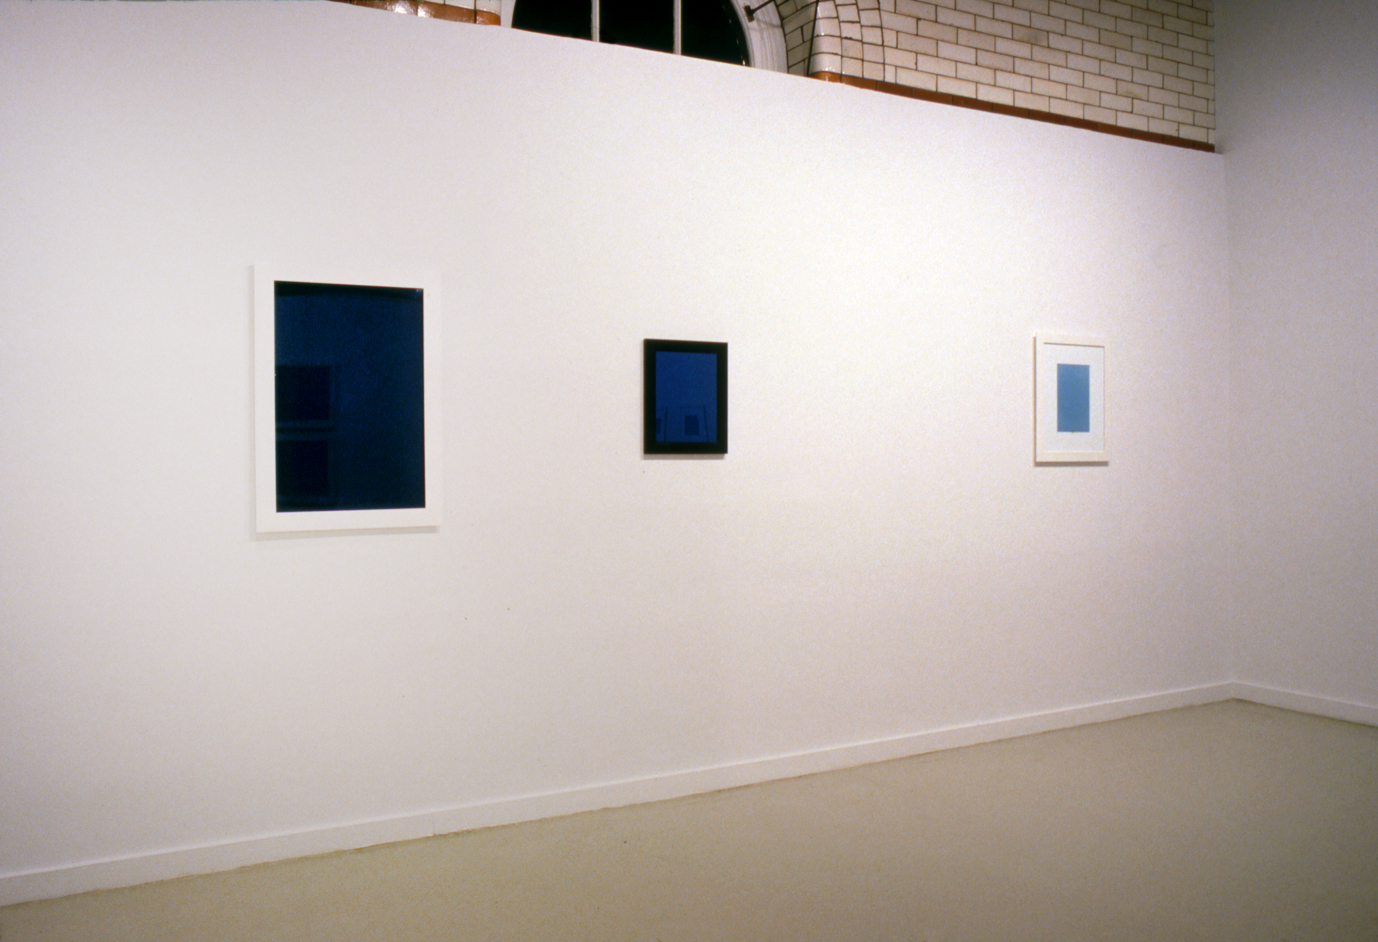 Installation view of 3 images on wall in the exhibition "Blue (NY)" by Donald Moffett.